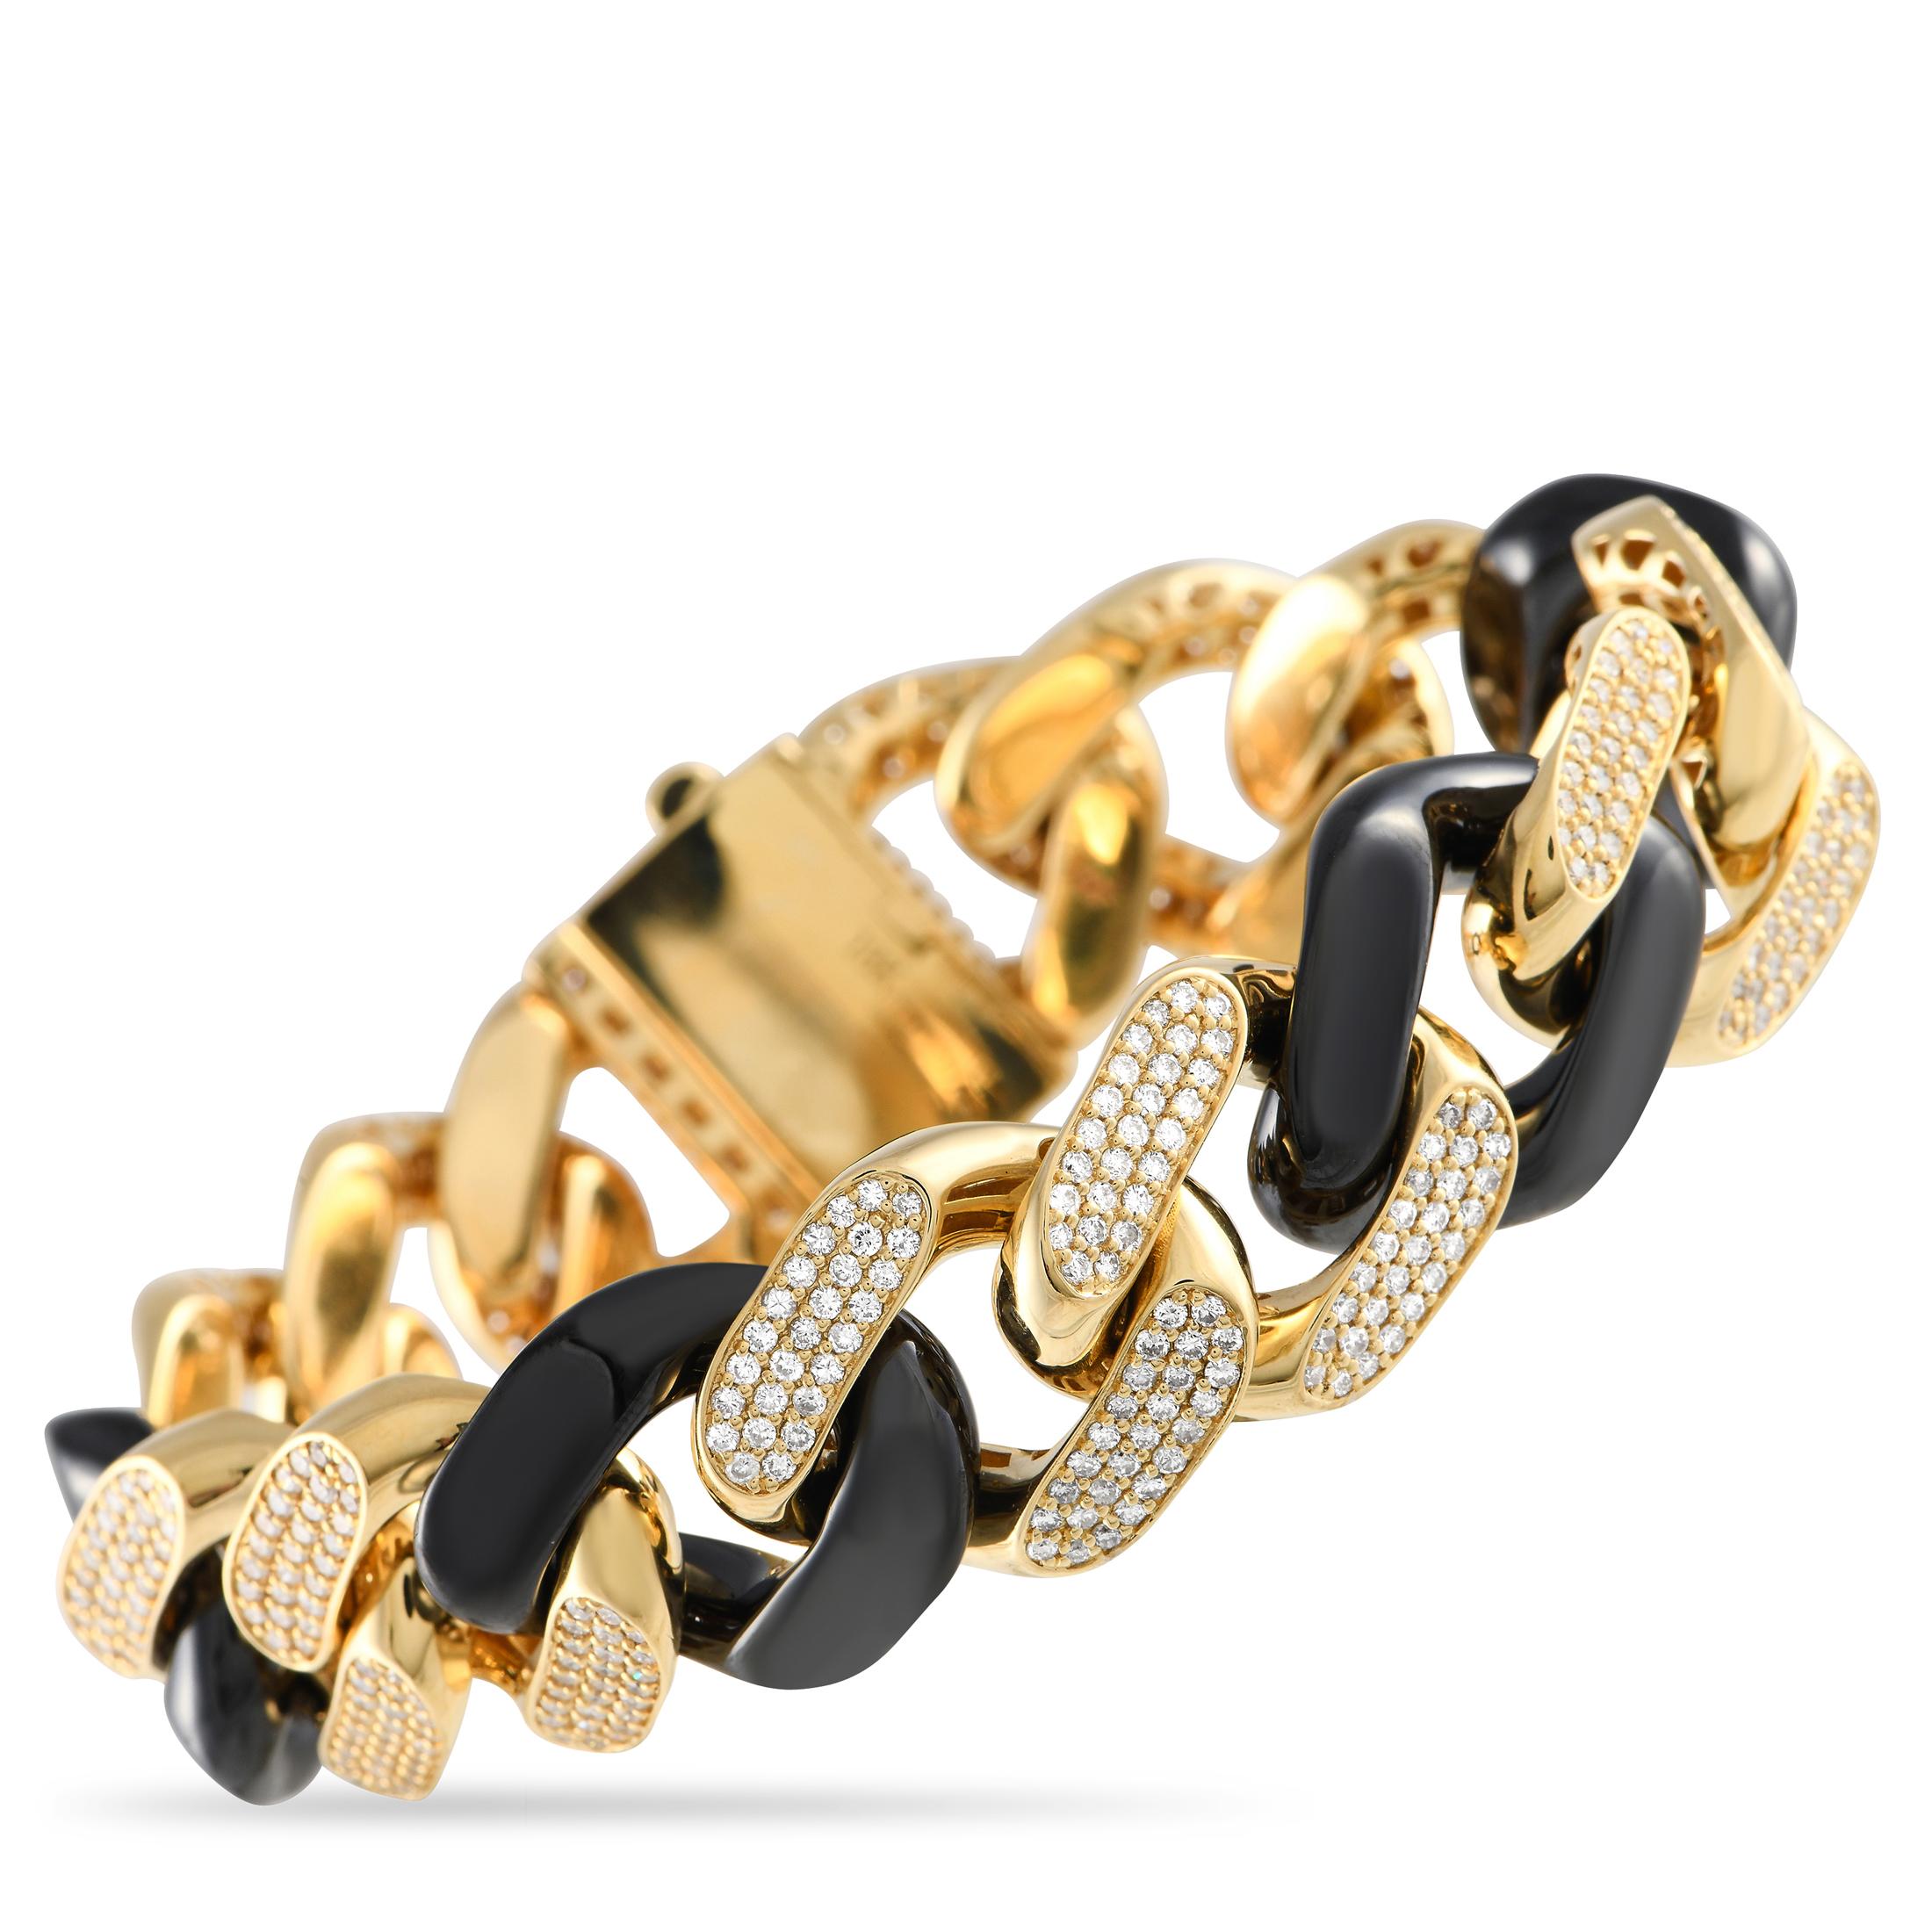 LB Exclusive 18K Yellow Gold 5.0ct Diamond Black Curb Chain Bracelet In New Condition For Sale In Southampton, PA